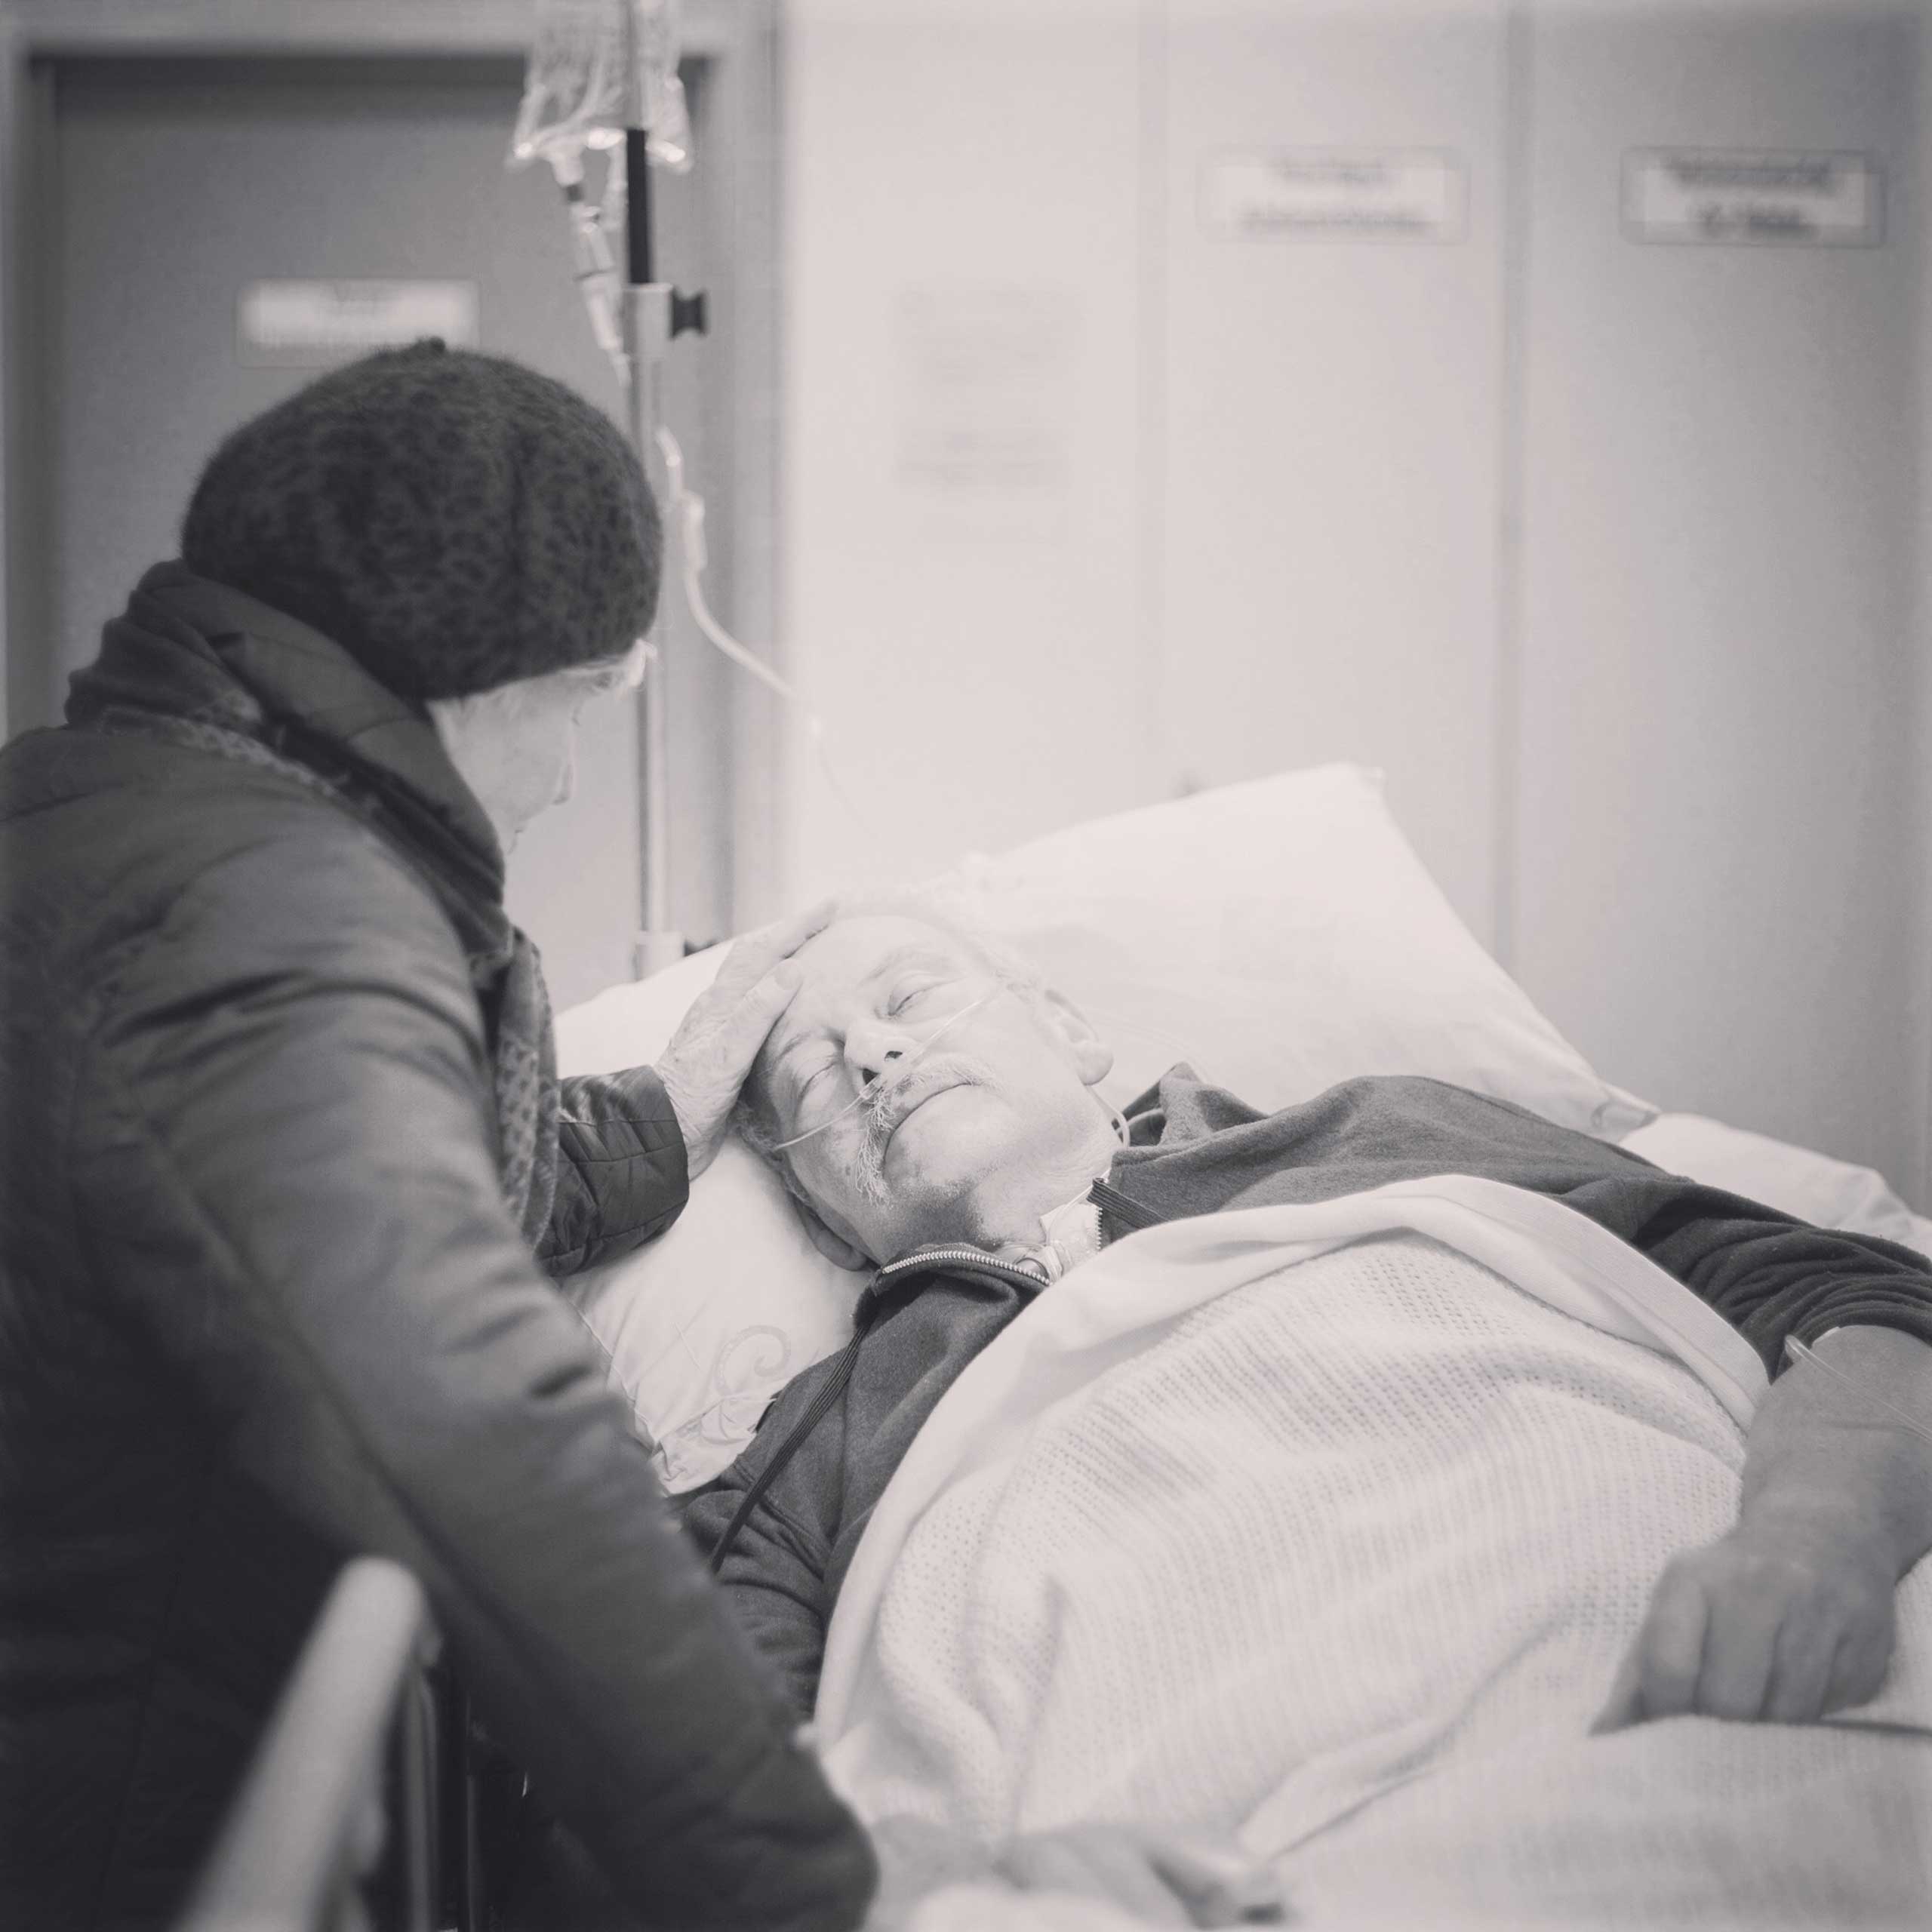 Oma seeing him for the first time since the accident